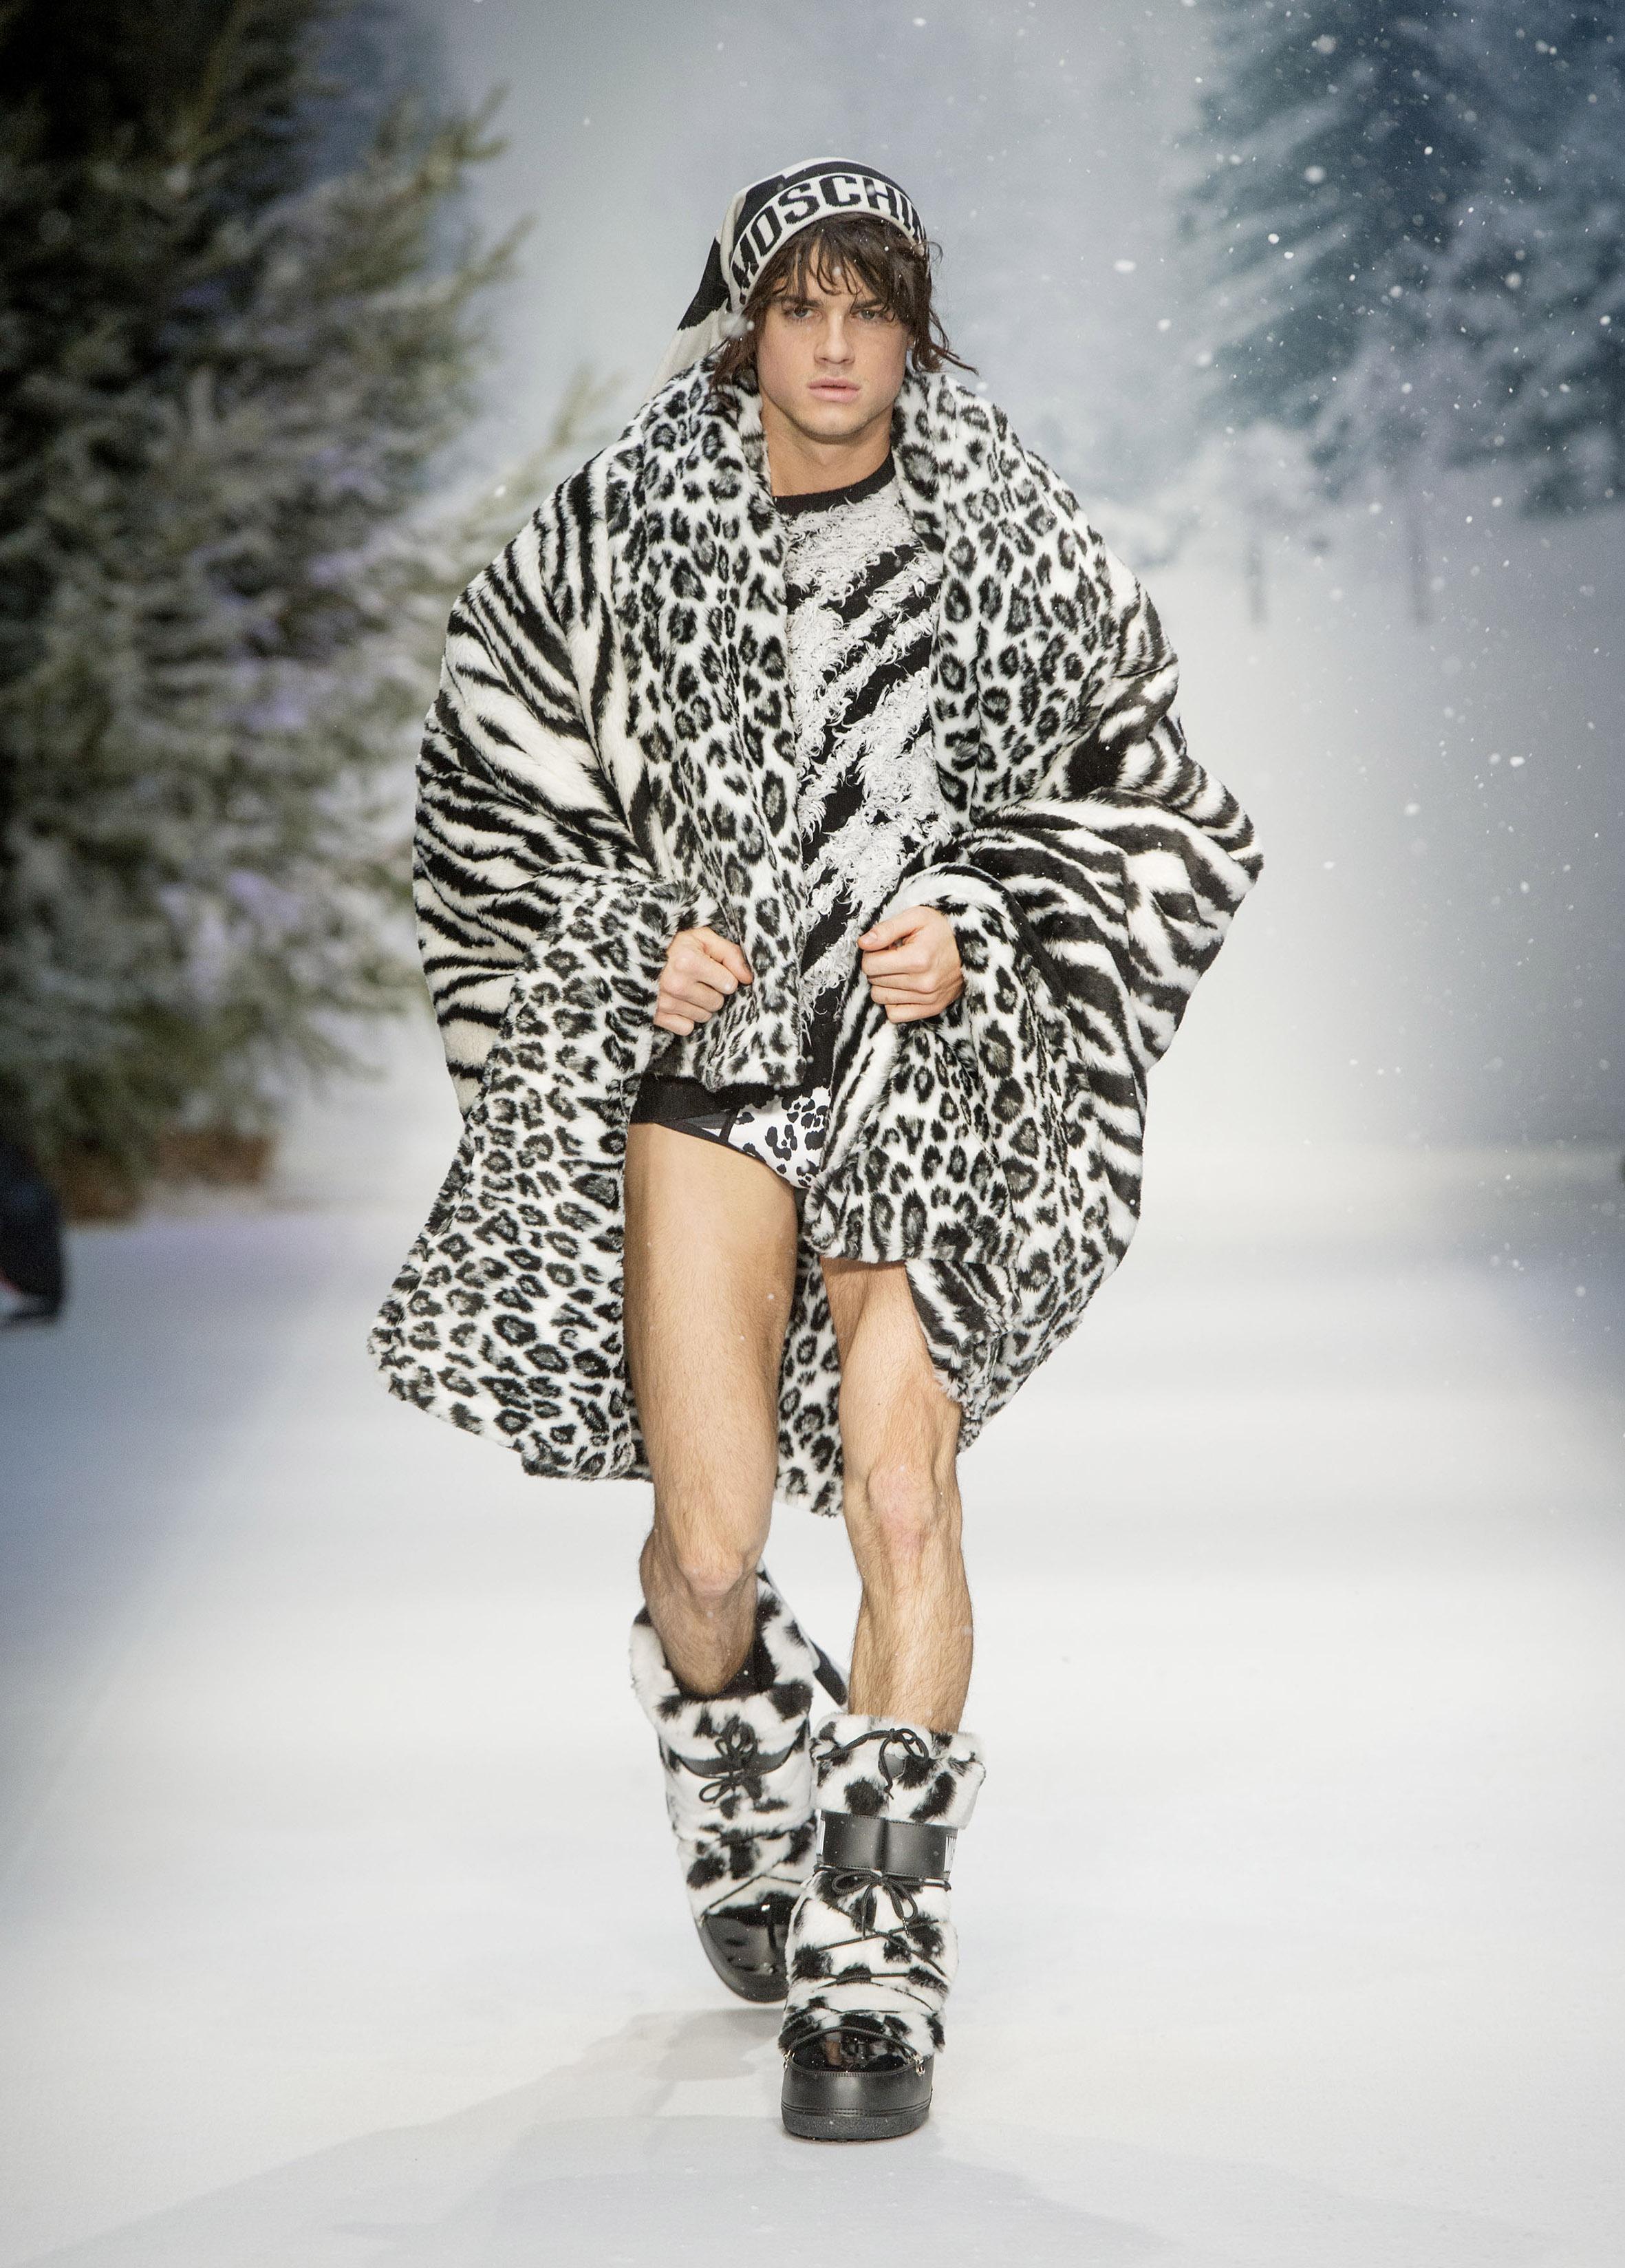 moschino-mode-homme-collection-automne-hiver-2015-londres